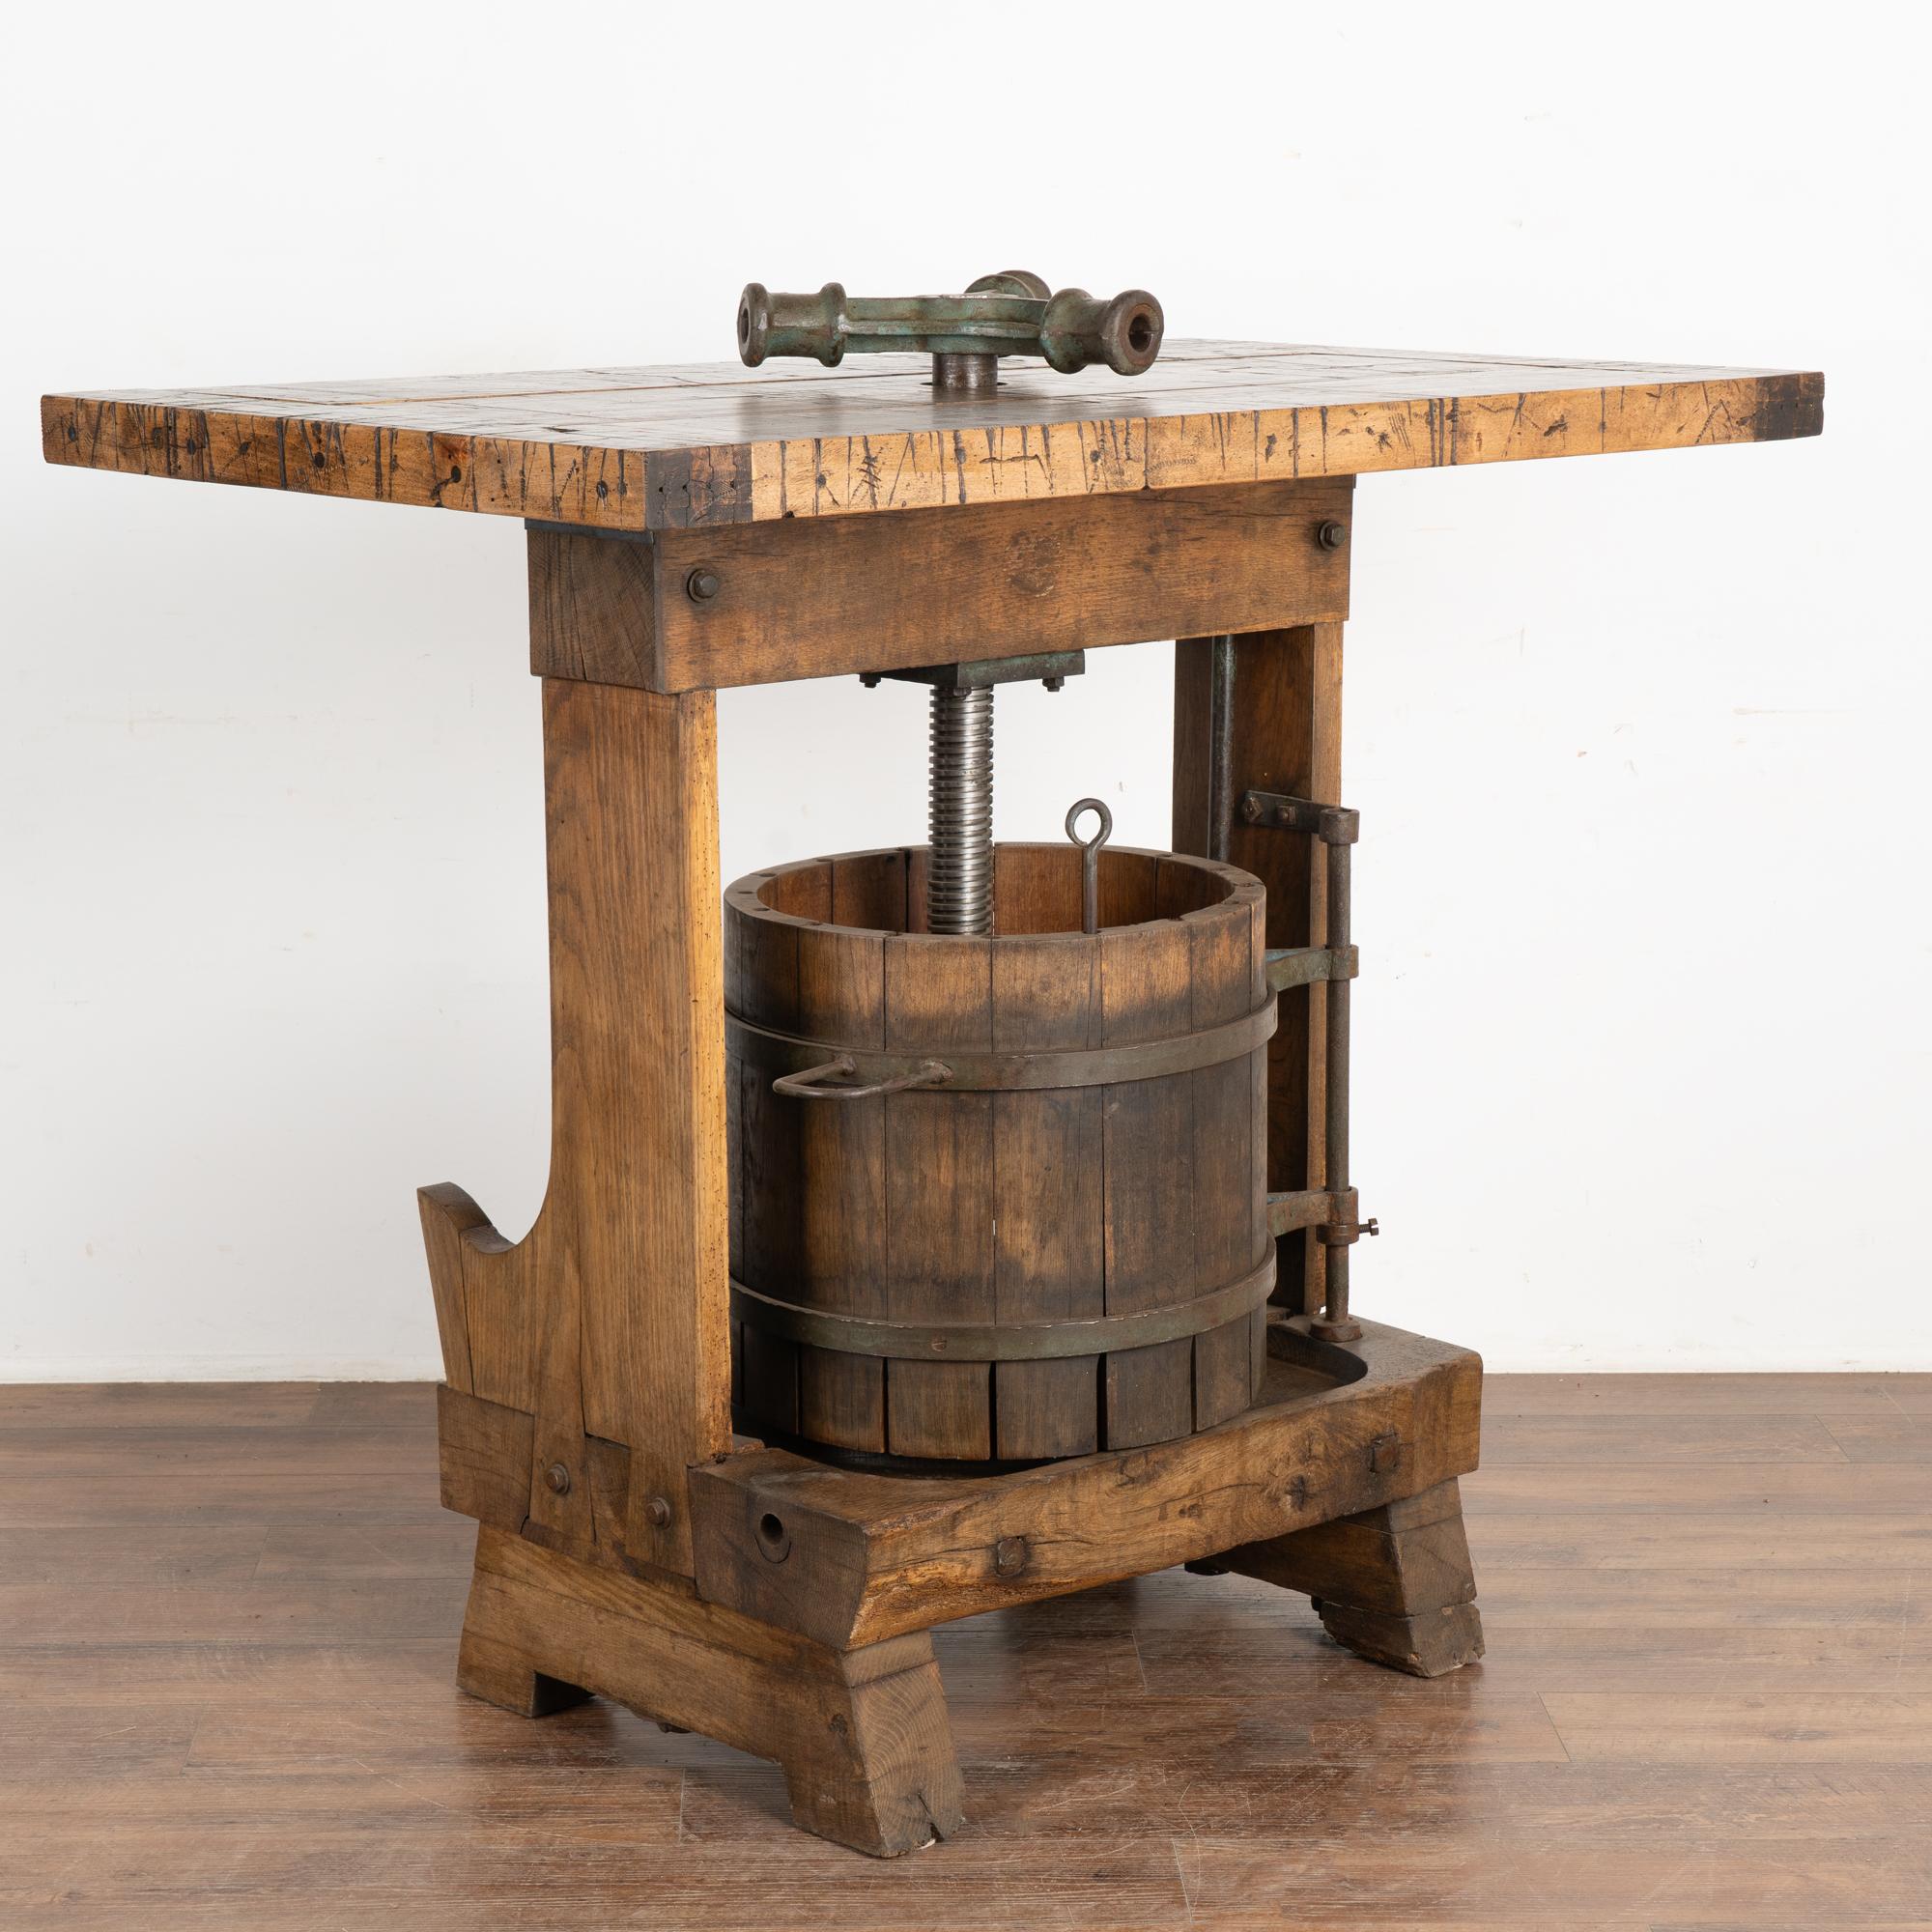 This unique wine tasting table or standing bar was created with an antique wine press from Hungary as the intriguing base.
The top is made from old boxcar/railroad car flooring which lends a strong balance to the industrial feel of the lower wine